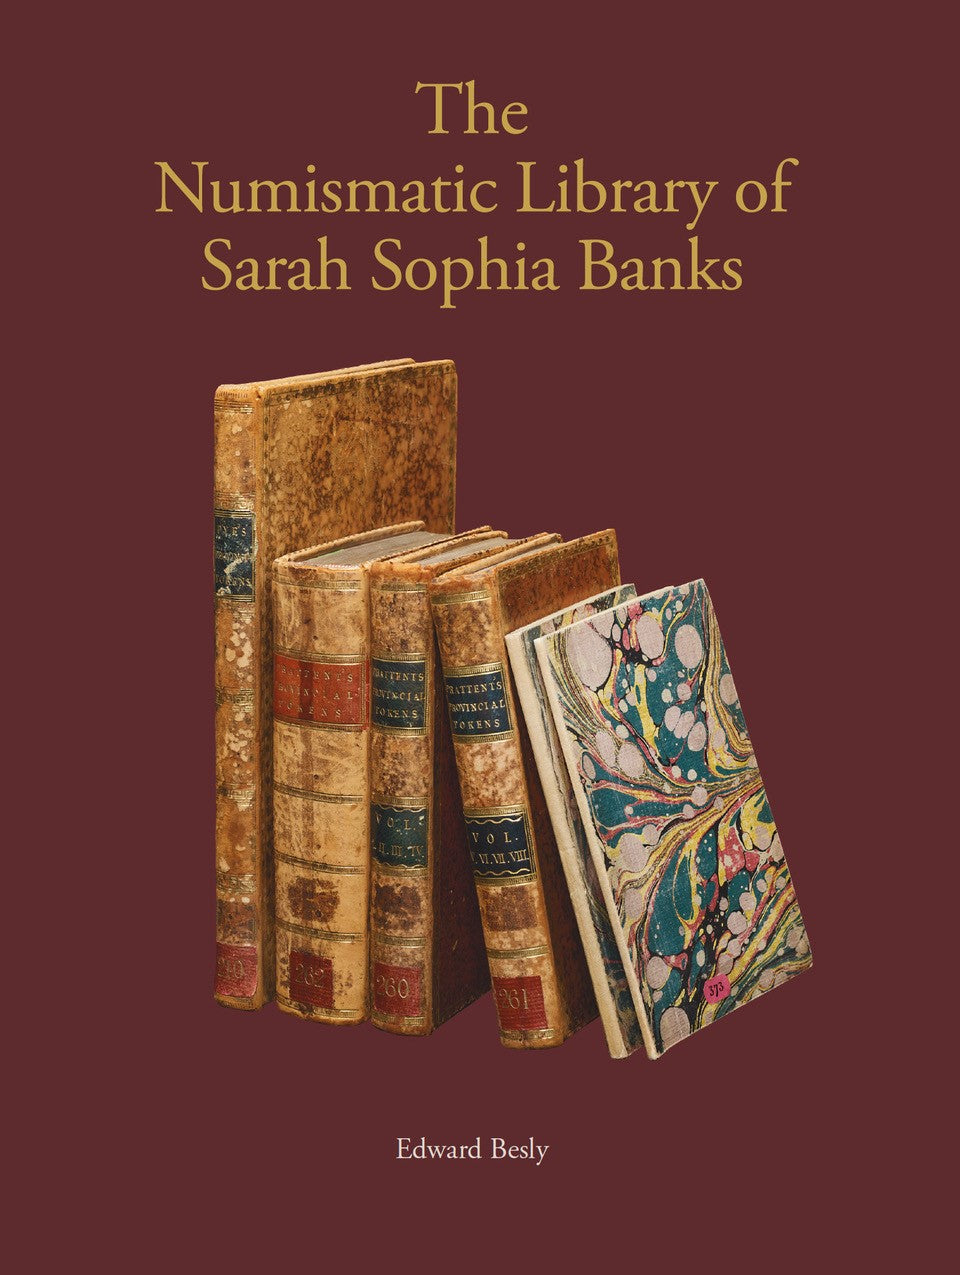 The Numismatic Library of Sarah Sophia Banks by Edward Besly